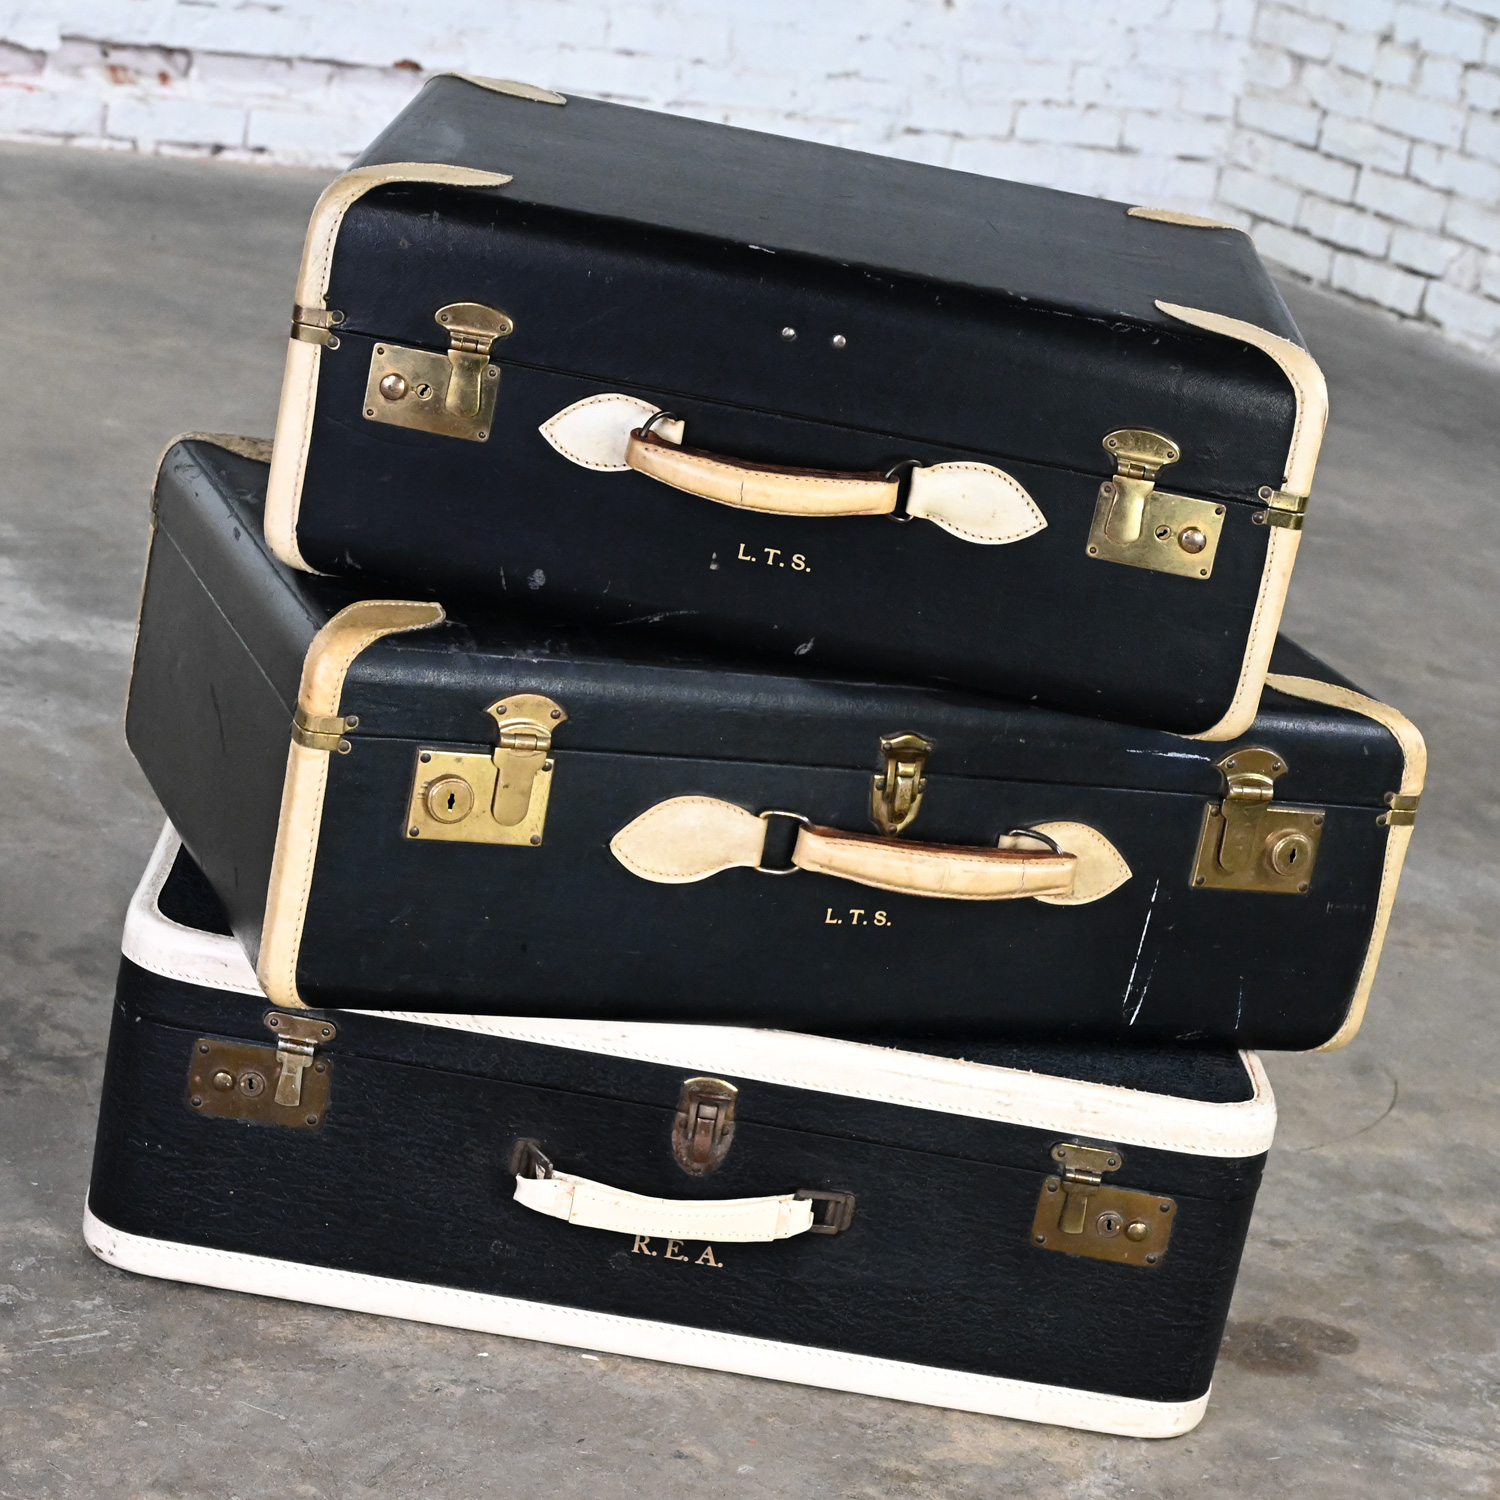 Mid Century Boho Chic Luggage End or Side Tables or Décor Black & White 3 Pieces